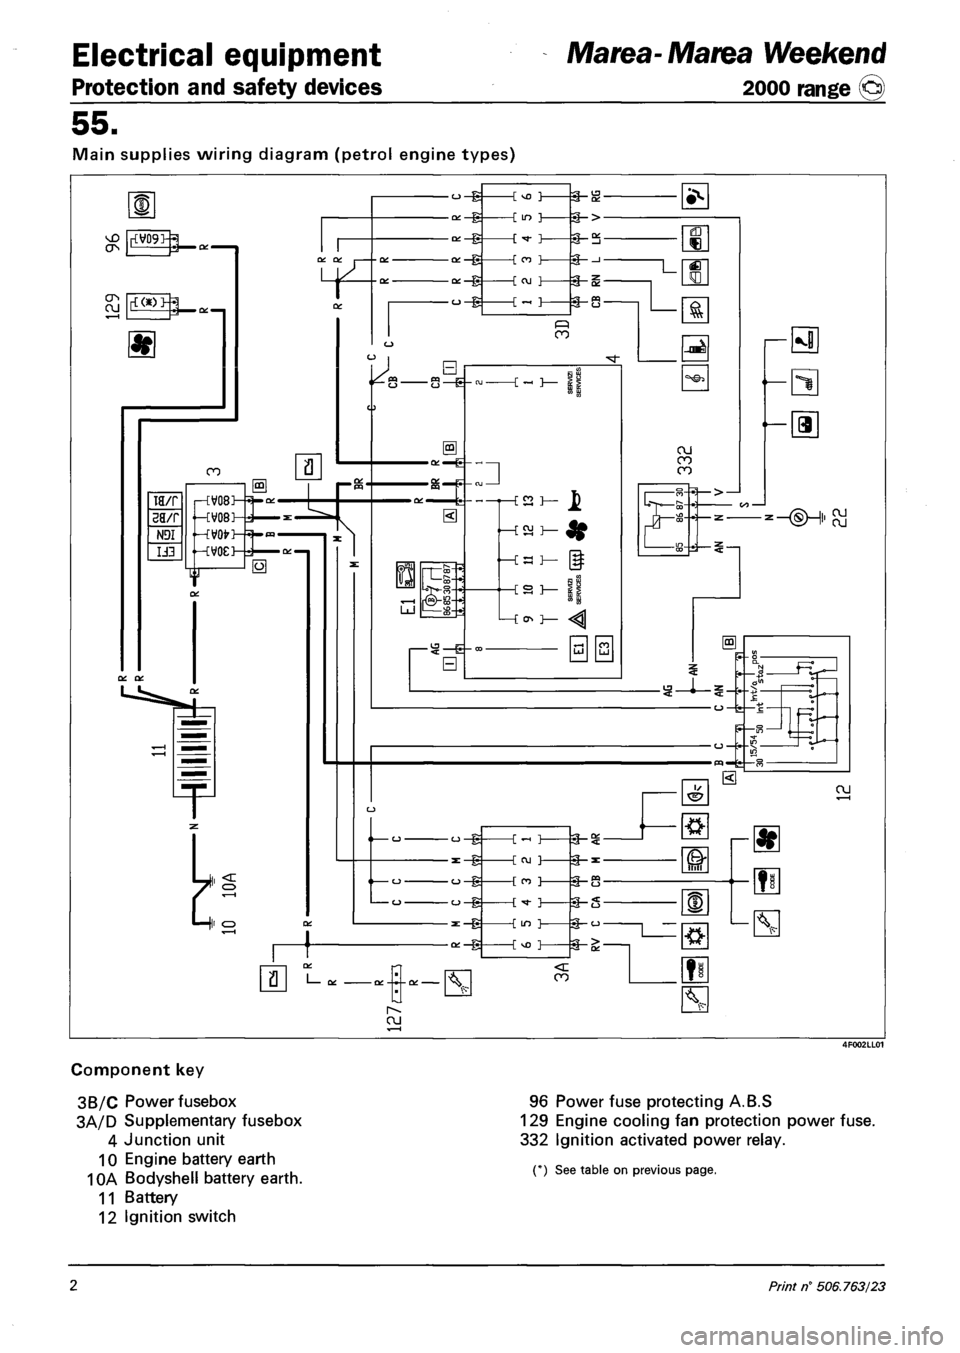 FIAT MAREA 2000 1.G Workshop Manual Electrical equipment 
Protection and safety devices 
Marea- Marea Weekend 
2000 range ©) 
55. 
Main supplies wiring diagram (petrol engine types) 
Component key 
3B/C Power fusebox 
3A/D Supplementar